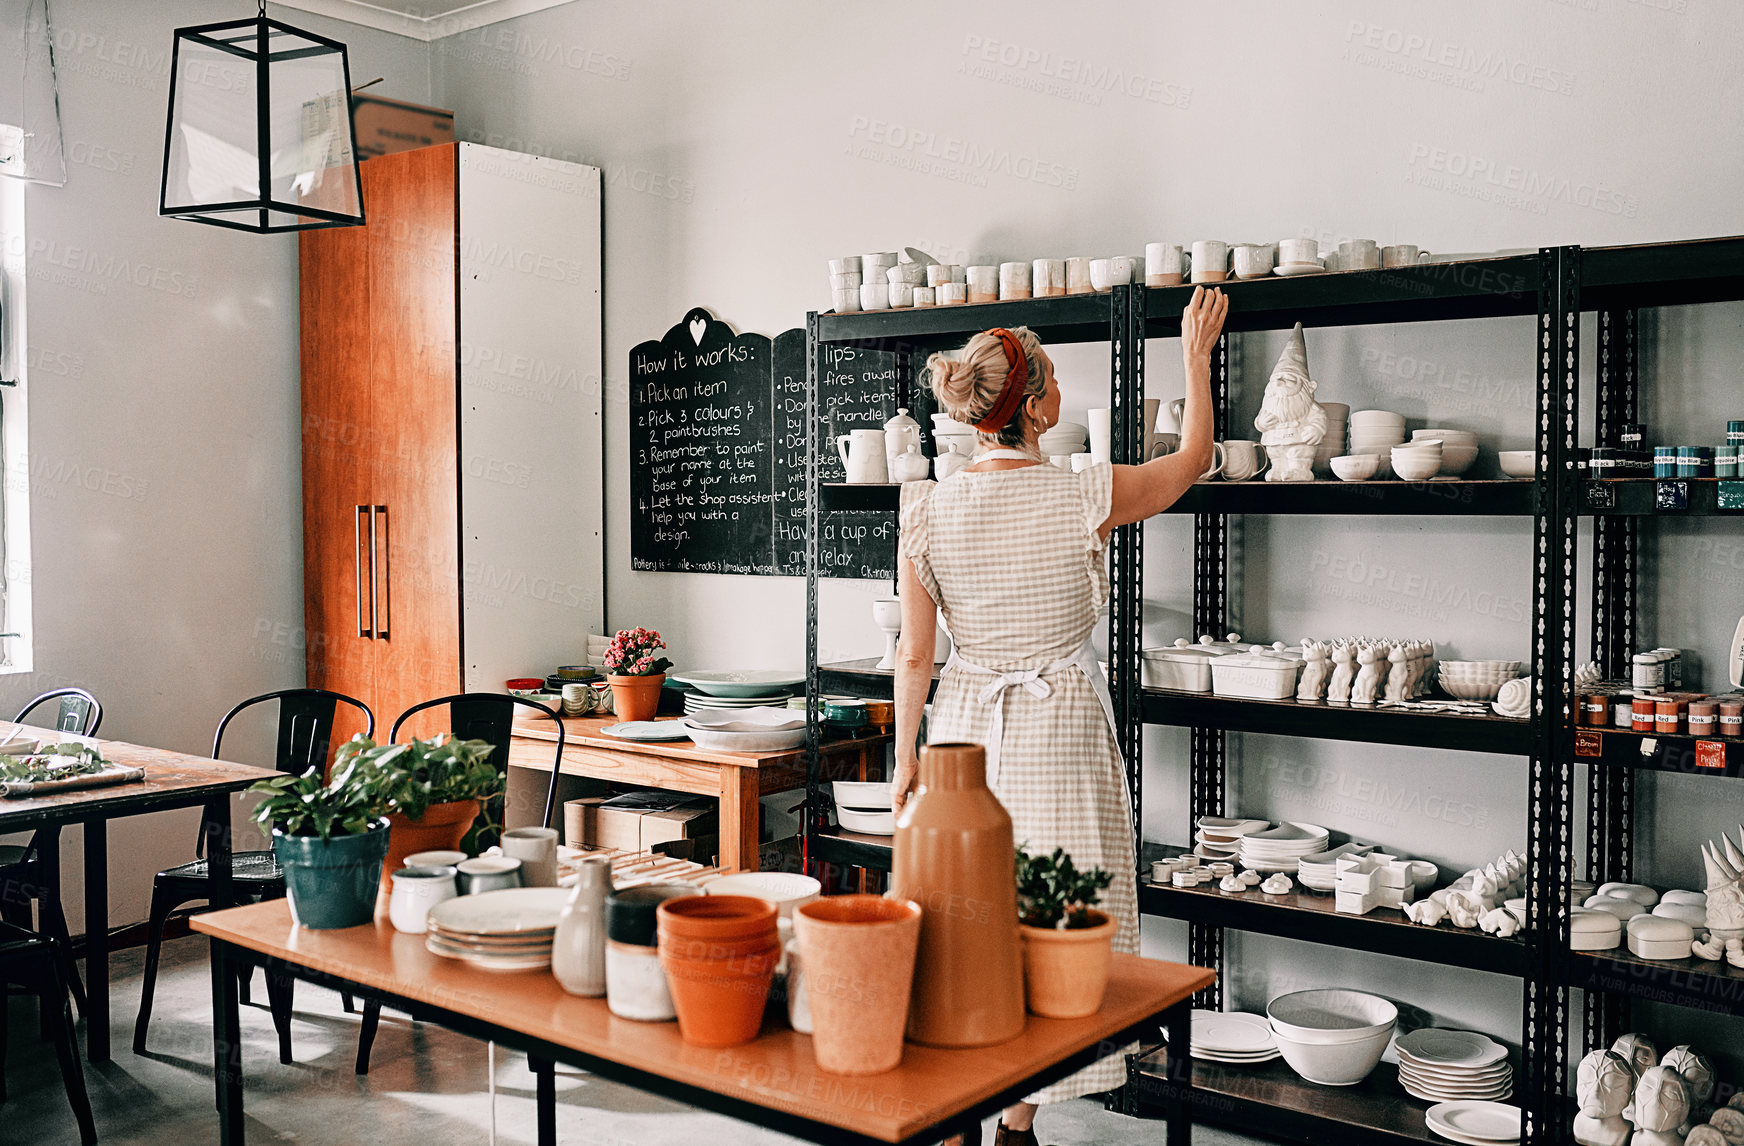 Buy stock photo Cropped shot of an unrecognizable woman standing and organising her pottery on a shelf in her workshop